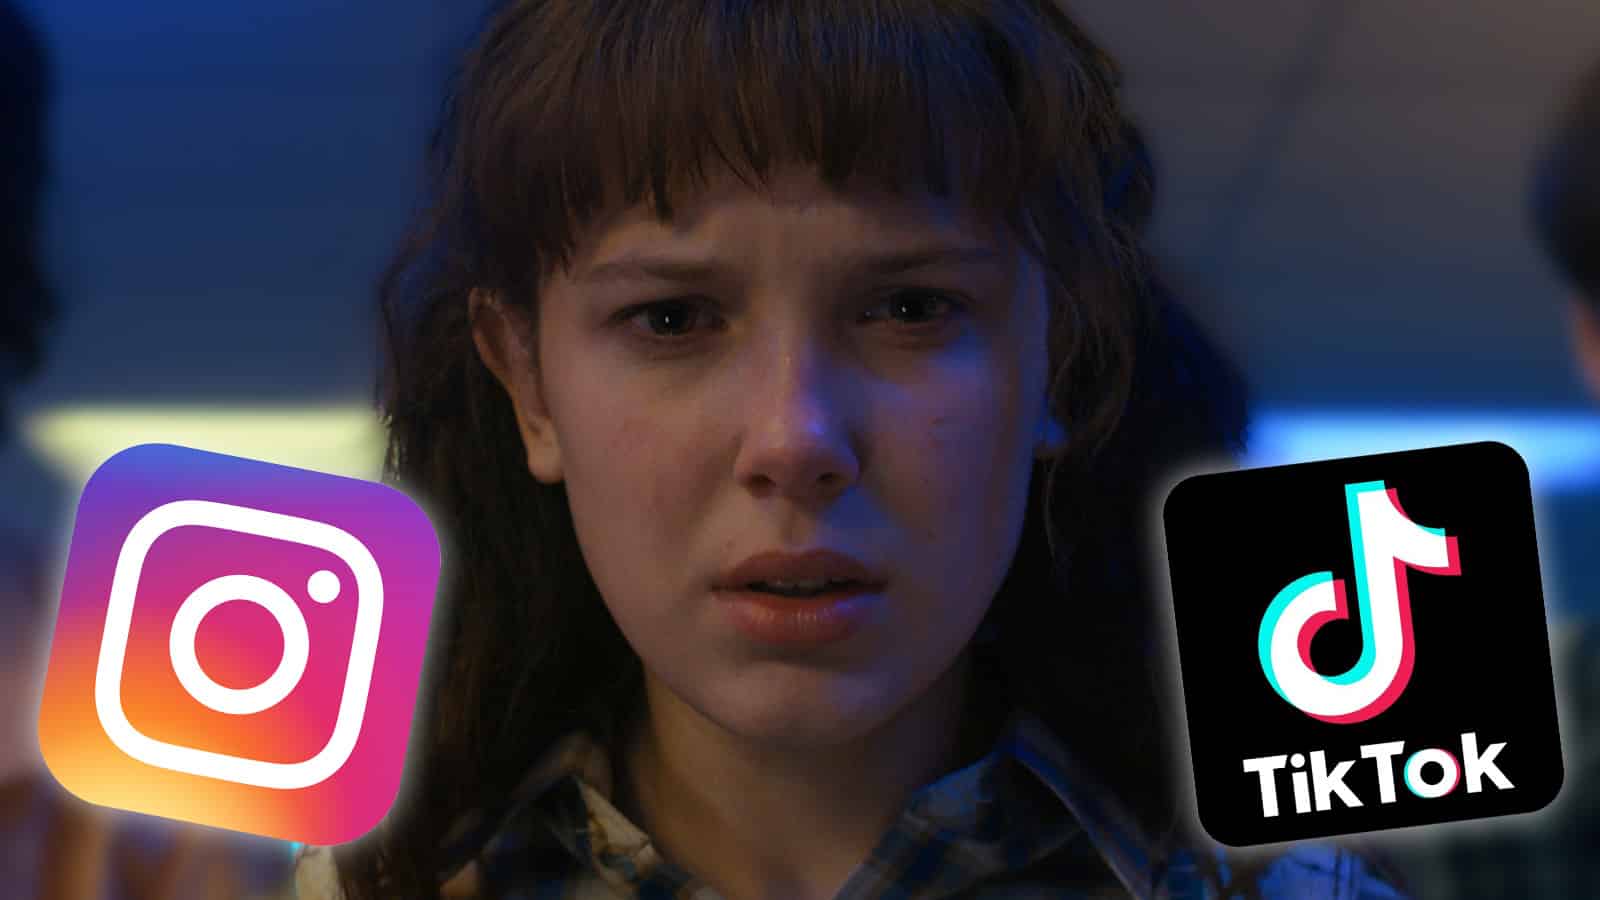 Stranger Things fans on TikTok are being told they're ruining the